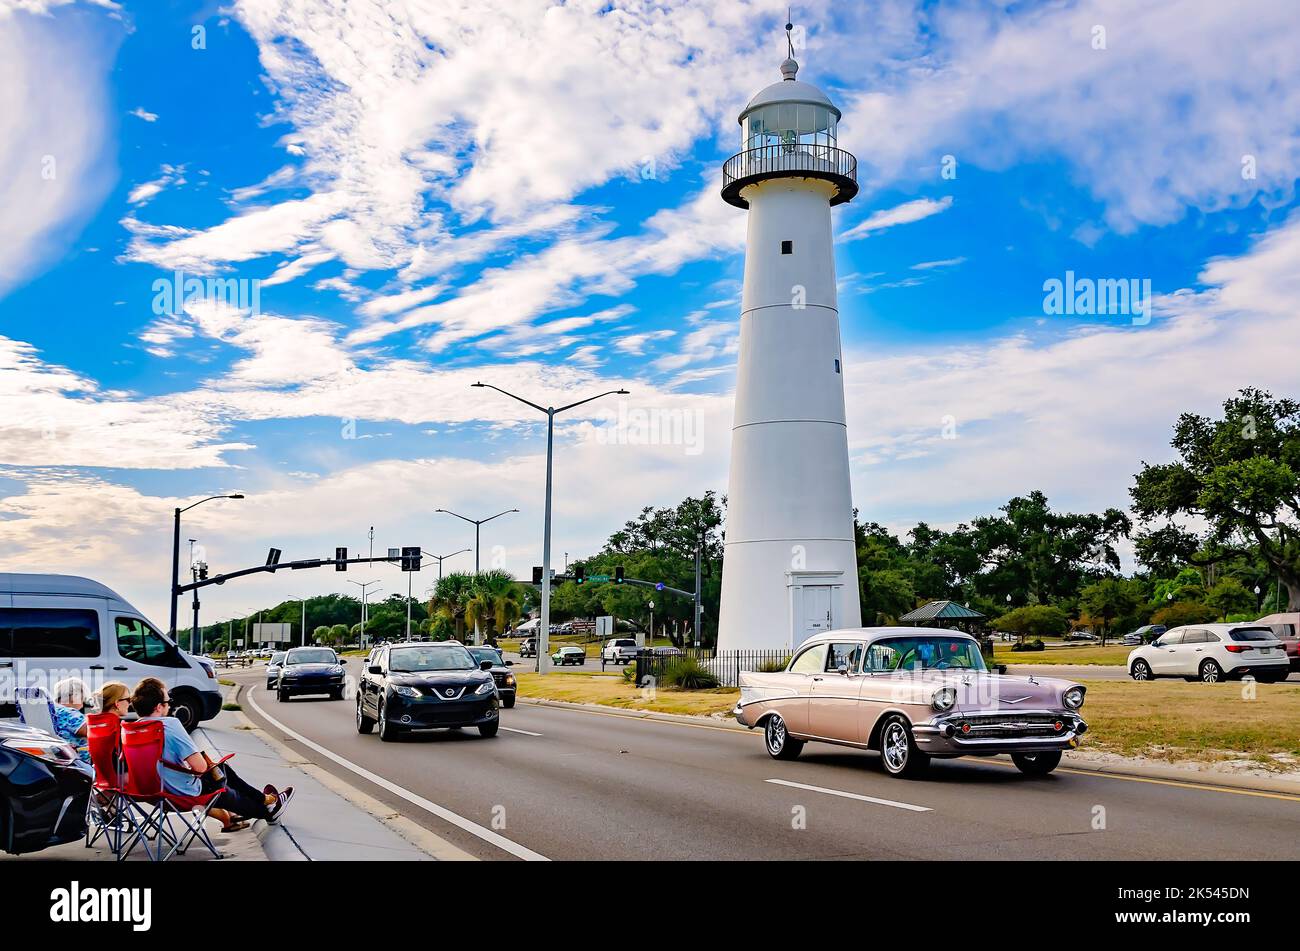 A 1957 Chevrolet Bel Air passes the Biloxi lighthouse during the 26th annual Cruisin’ the Coast antique car festival in Biloxi, Mississippi. Stock Photo